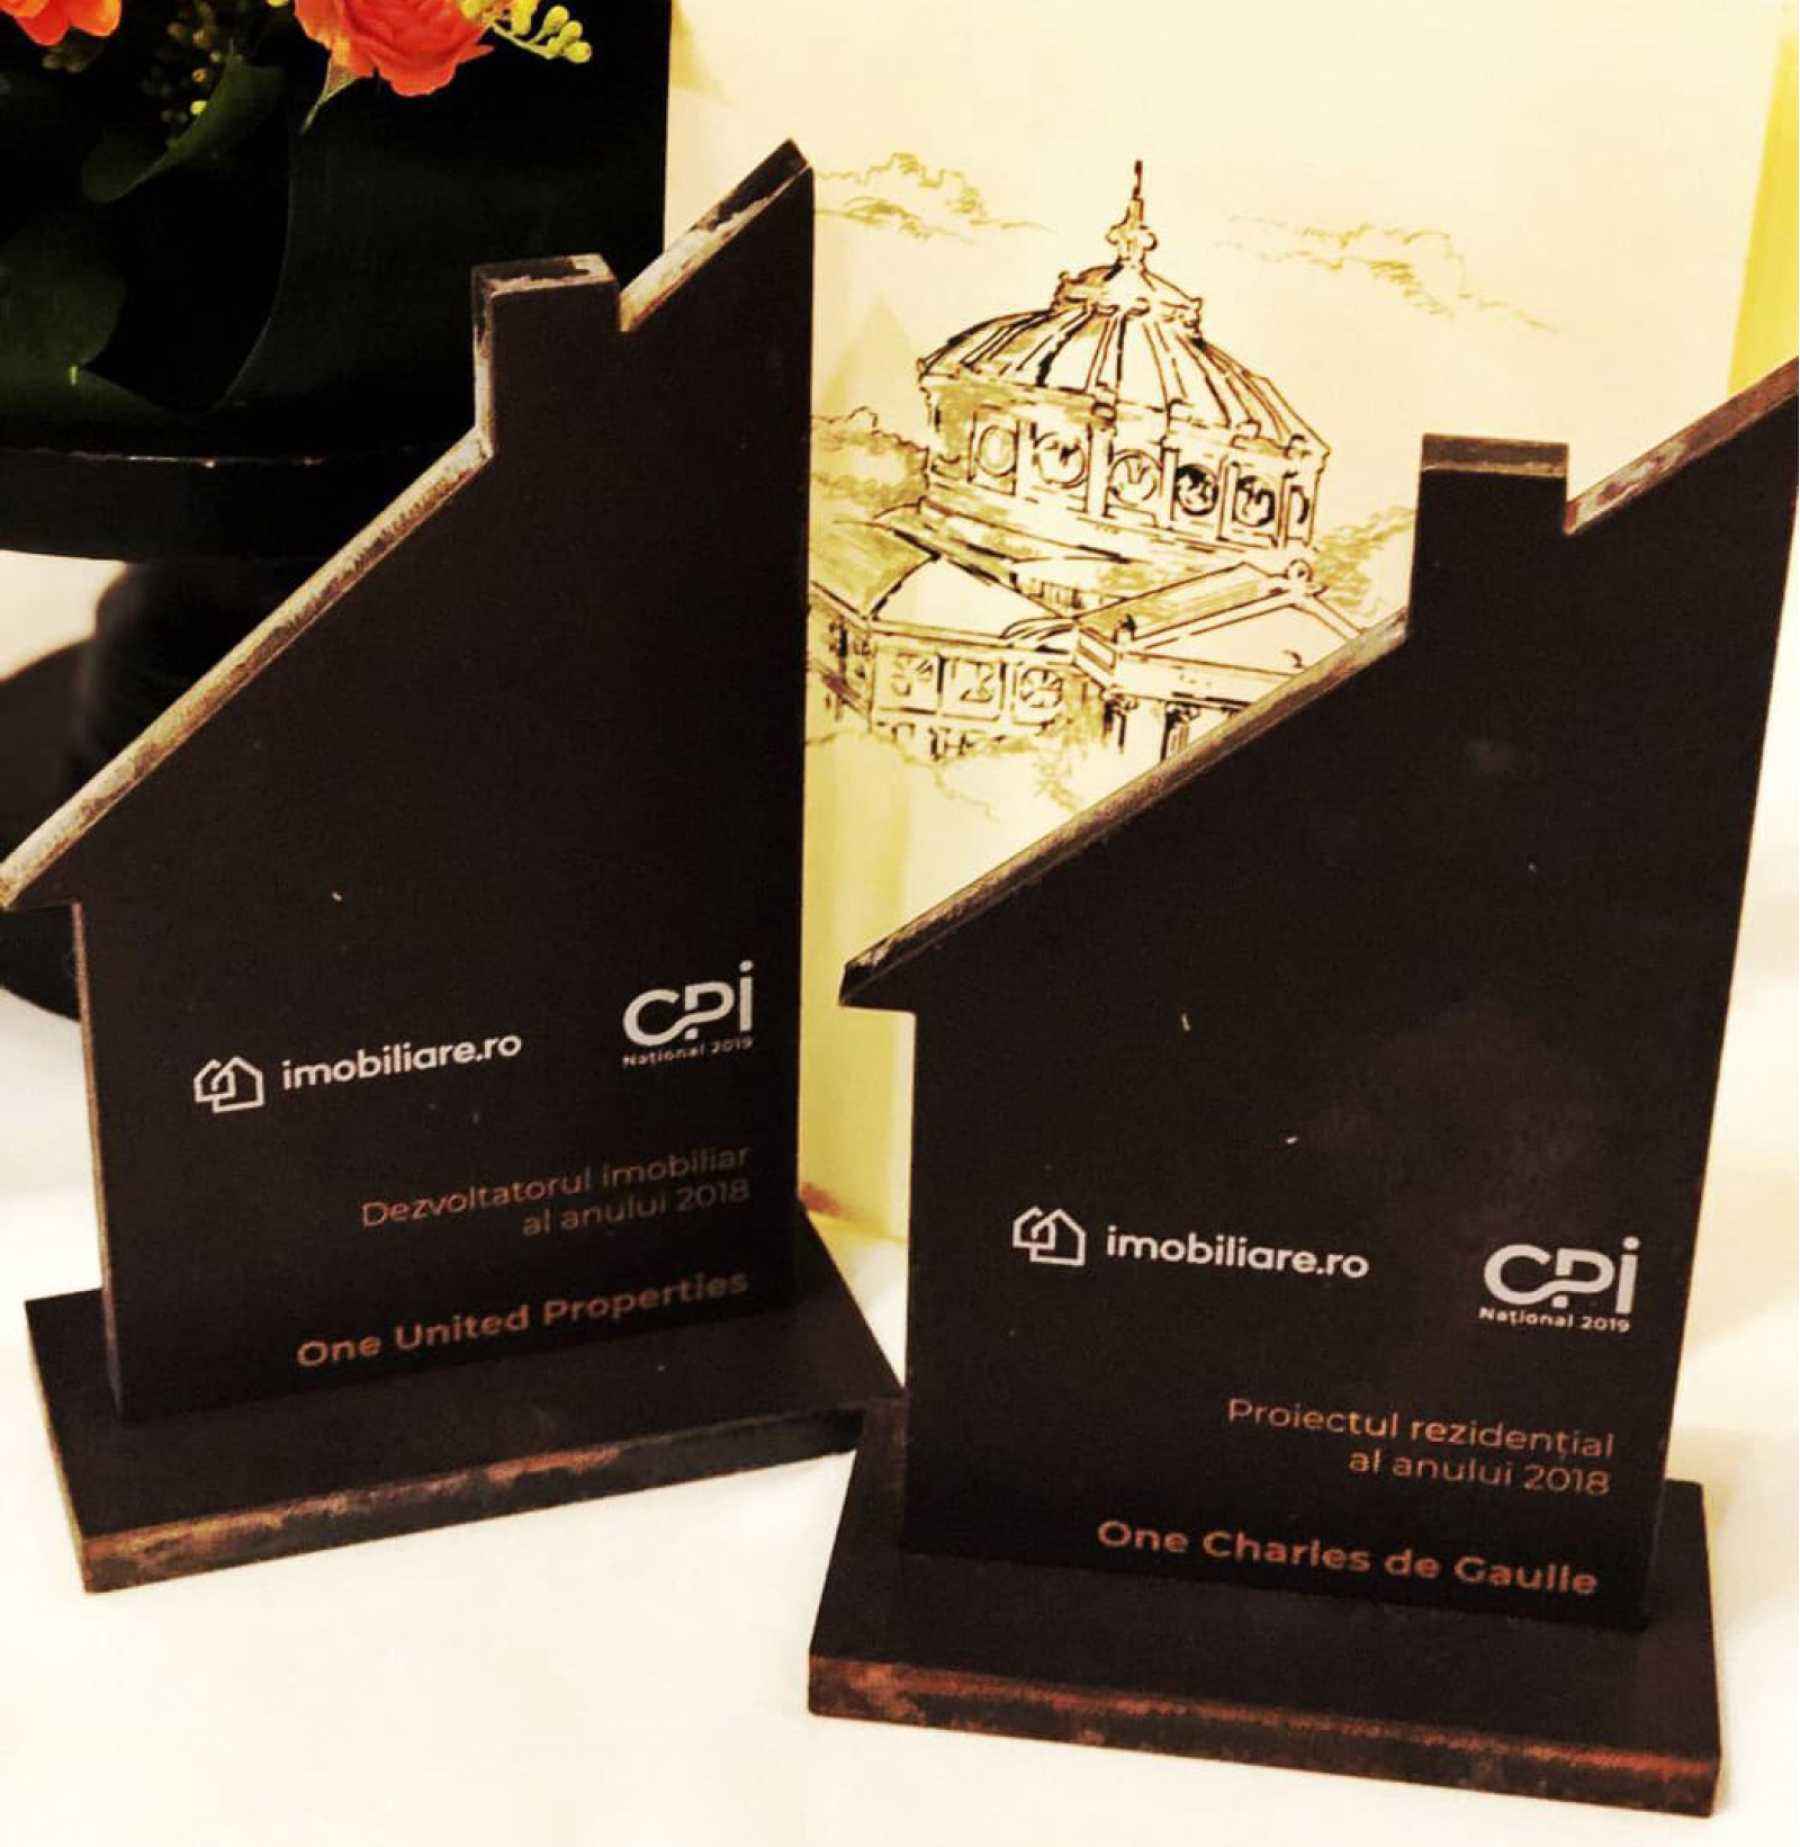 One United Properties, recipient of Developer of the Year & Residential Project of the Year Awards at CPI Național 2019